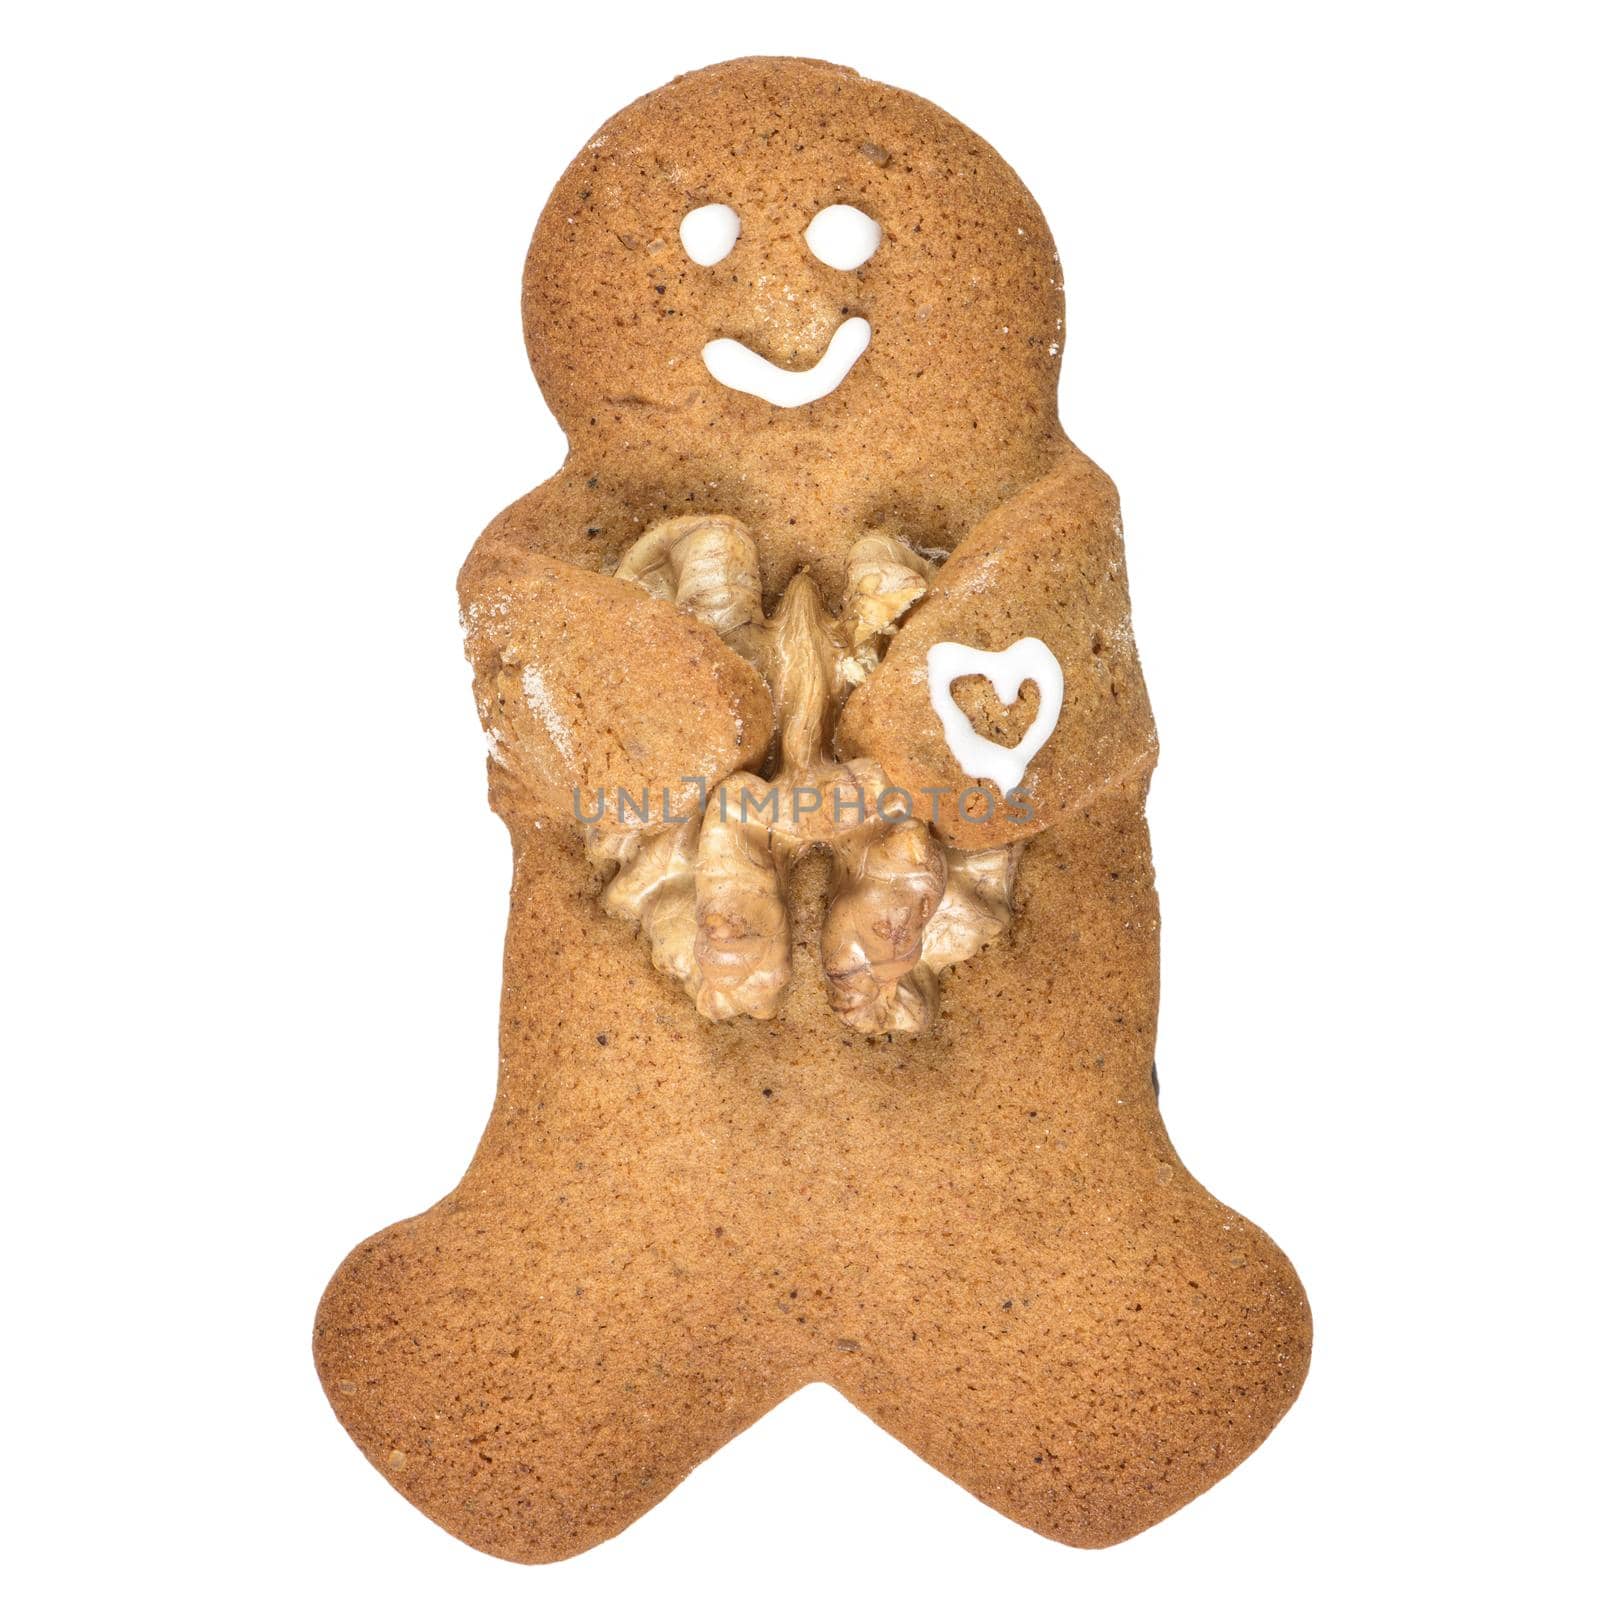 Gingerbread man cookie embrancing walnut isolated on white background.